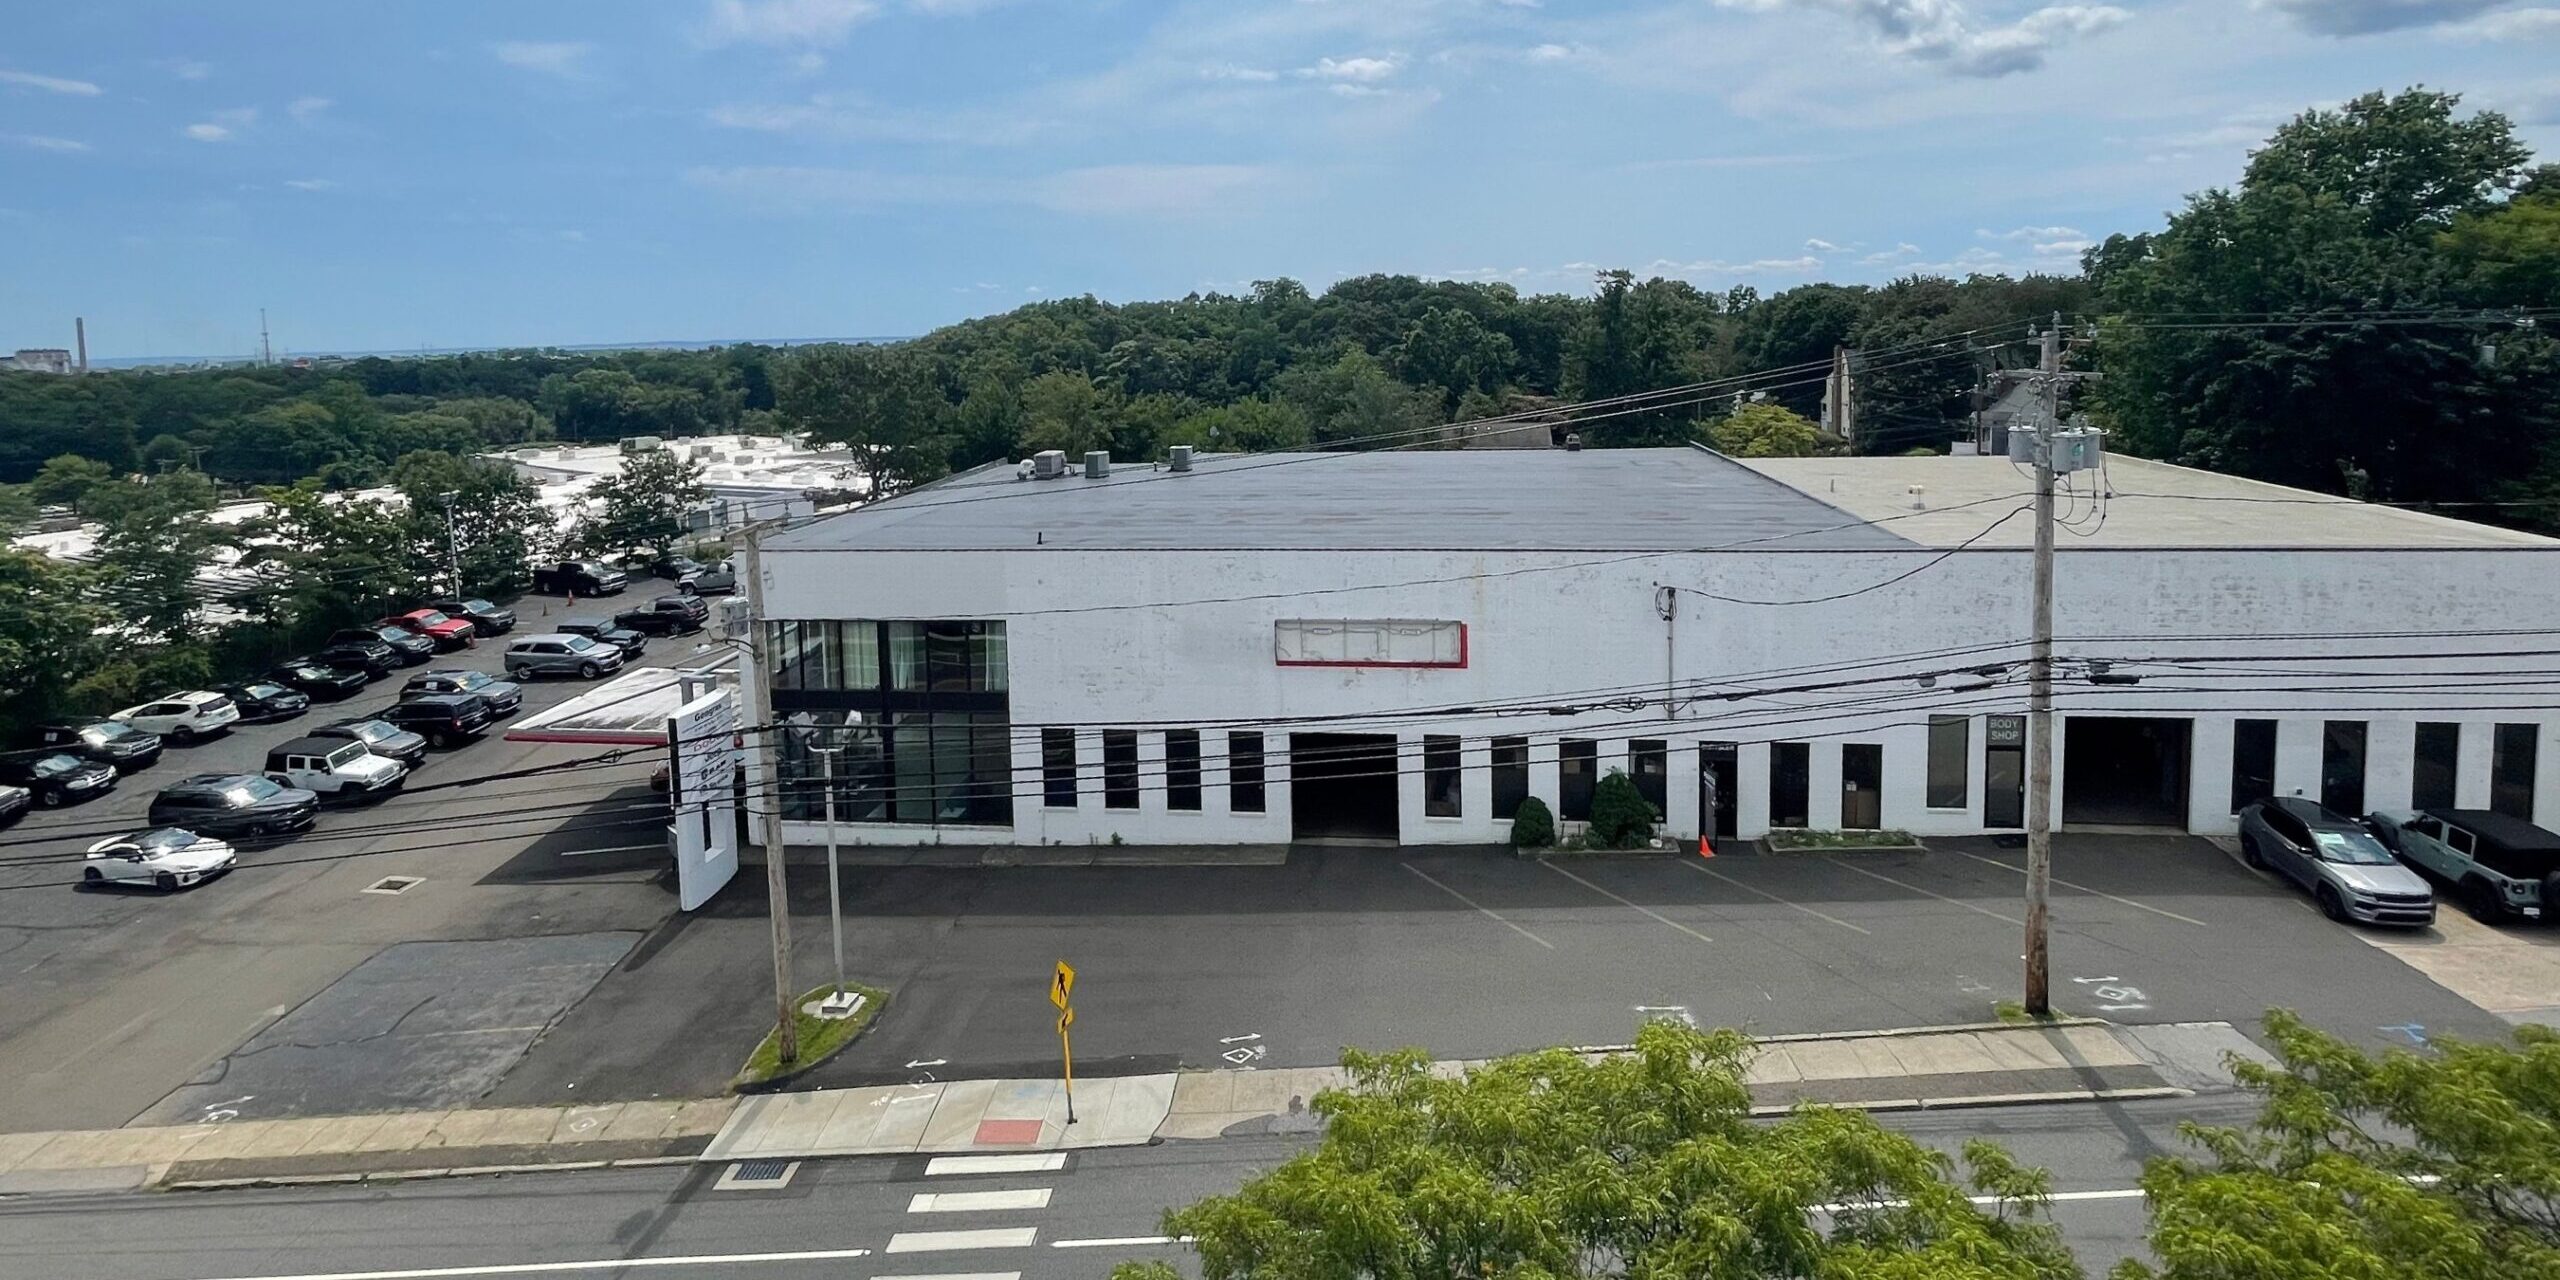 16 - 387 Tunis Hill Road is a 21,921 SF Industrial Building on 1.47 Acres